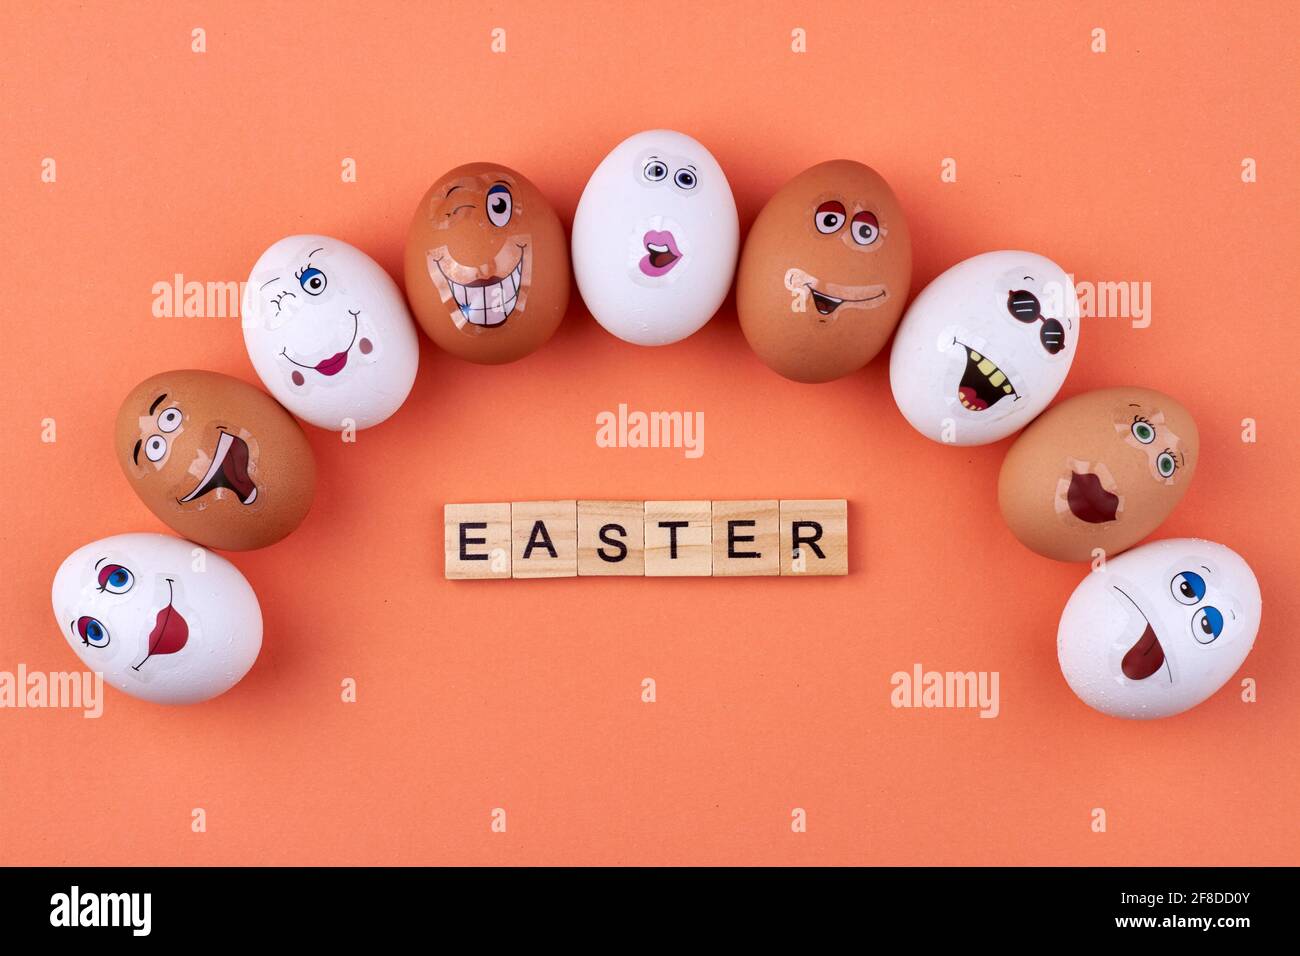 White and brown eggs with smiley faces. Stock Photo